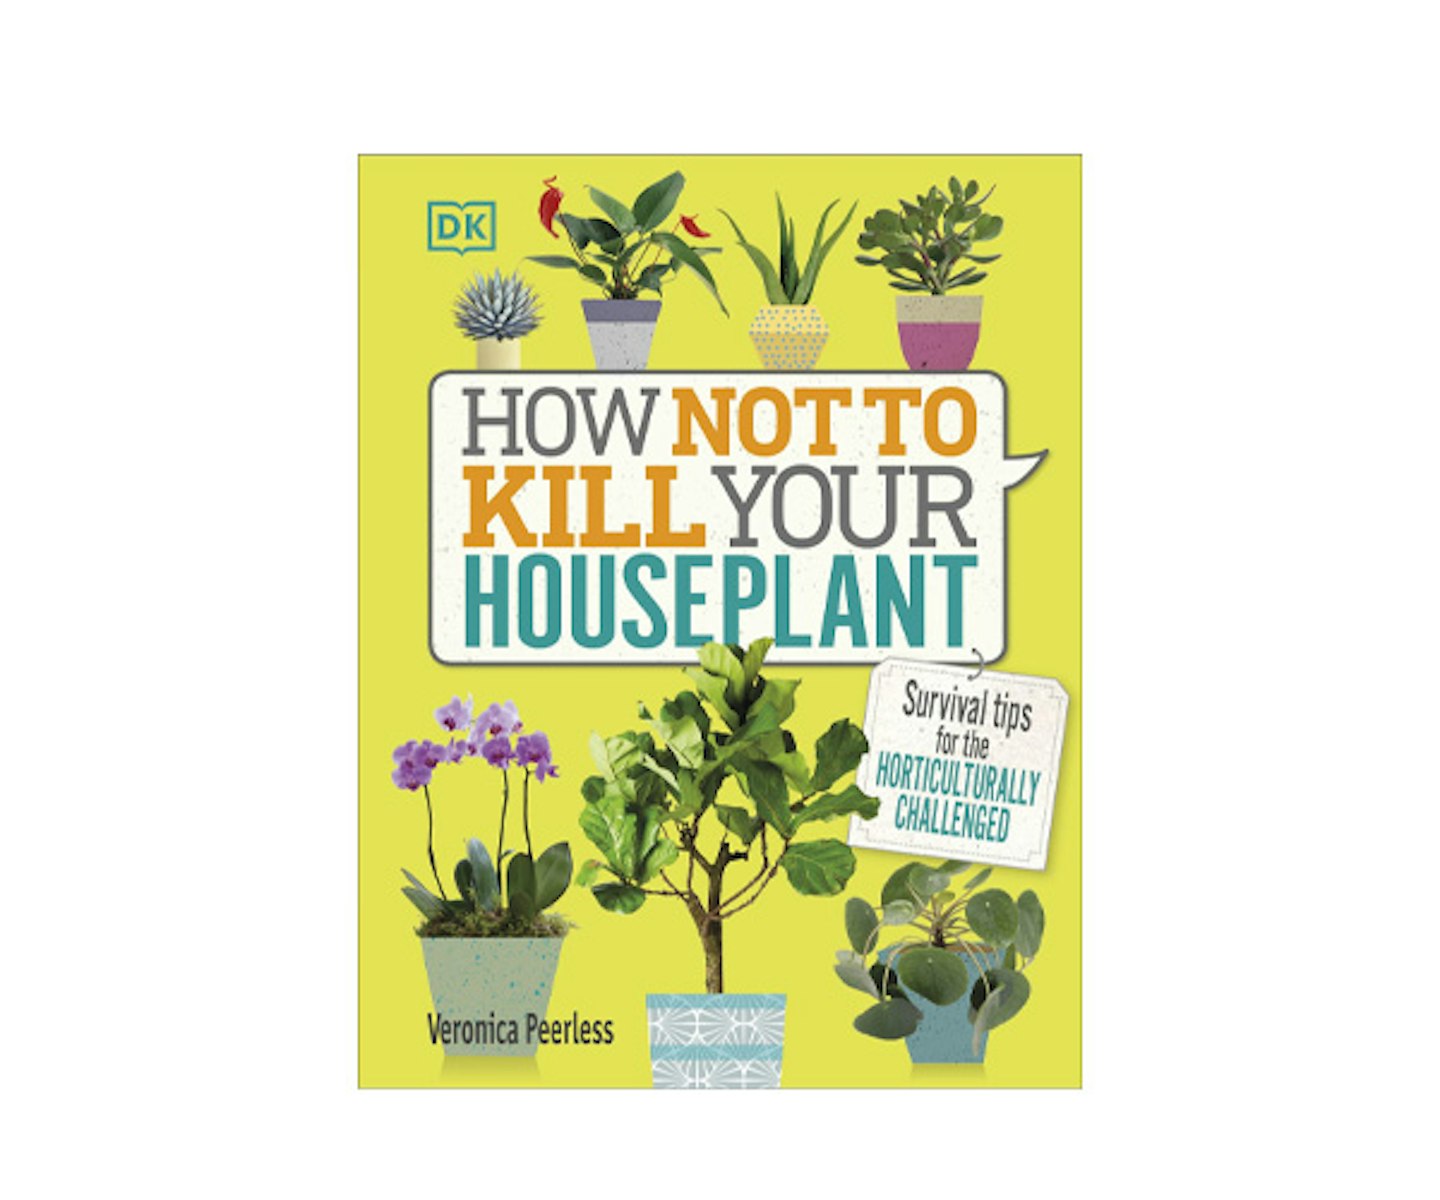 How to not kill your house plants